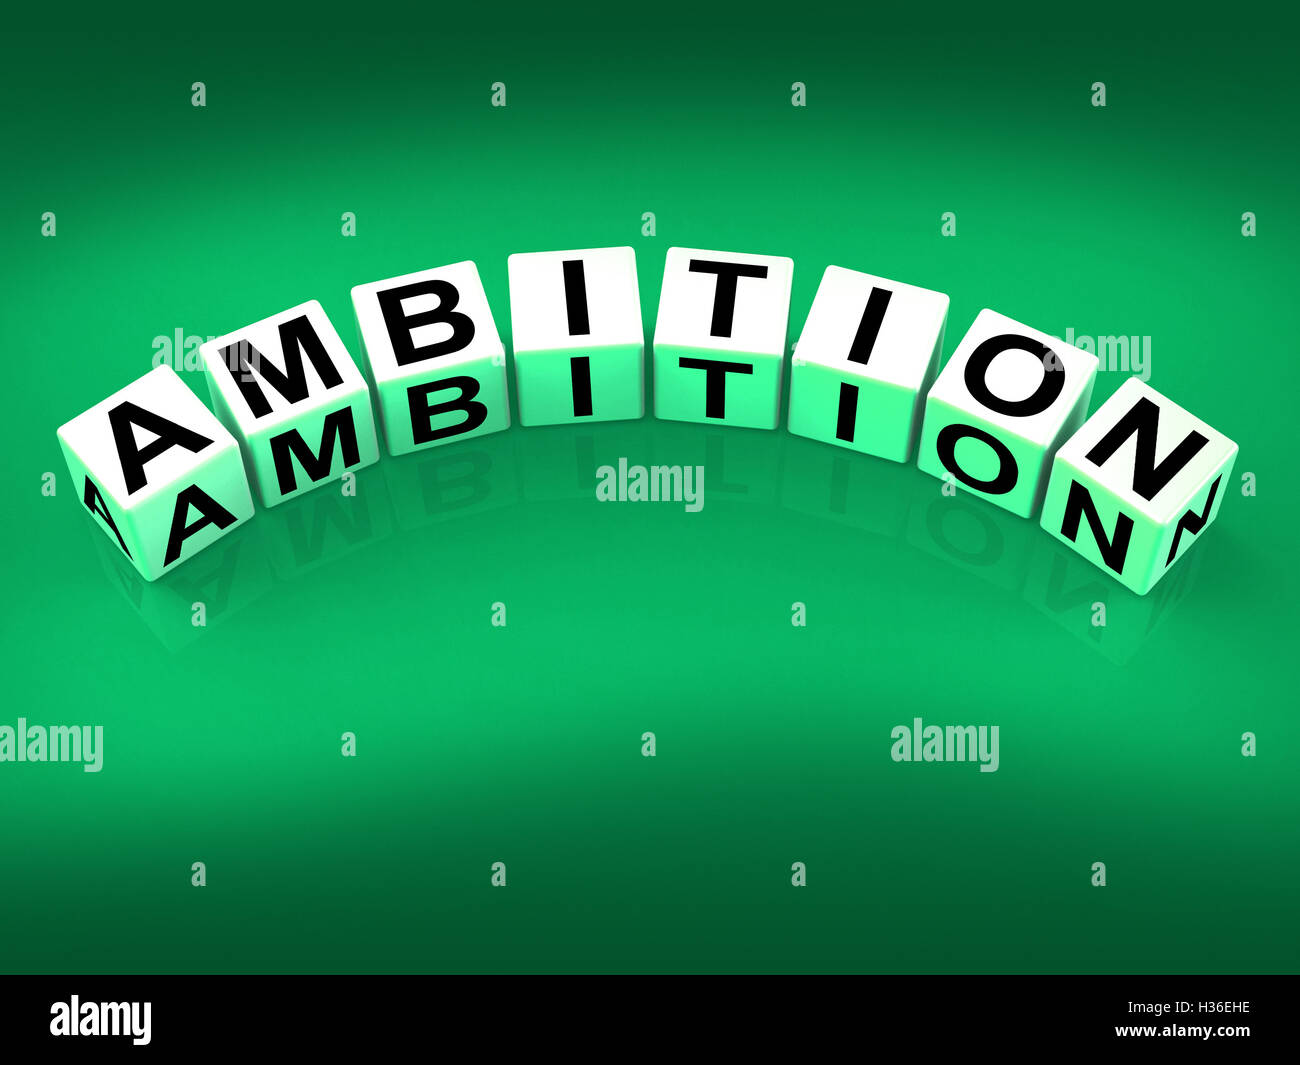 Ambition Blocks Show Targets Ambitions and Aspiration Stock Photo